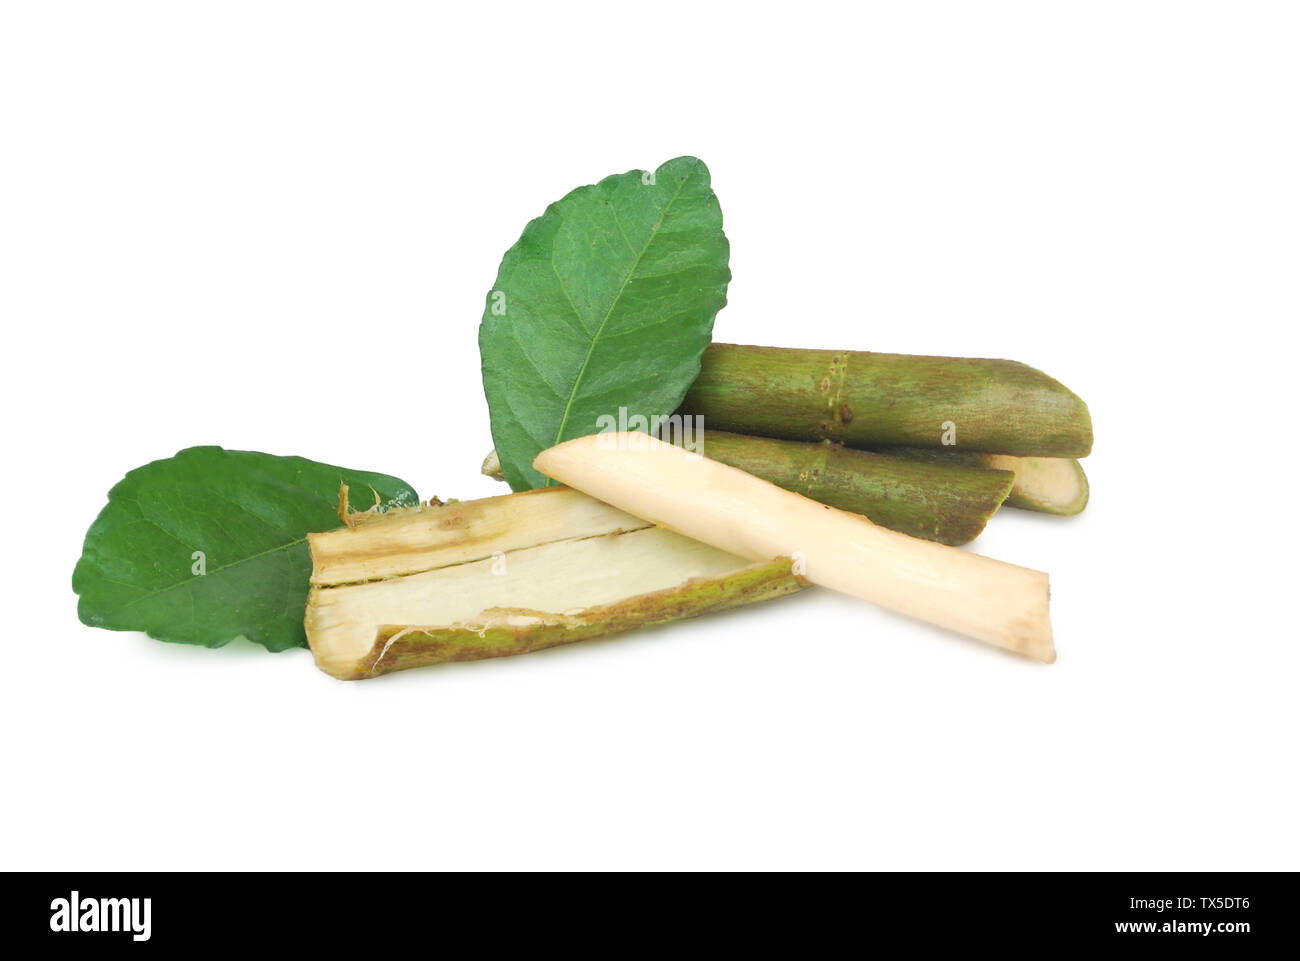 Streblus asper Lour.Has anti-bacterial effect, treat toothache and has anti-inflammatory effect.With Clipping Path. Stock Photo